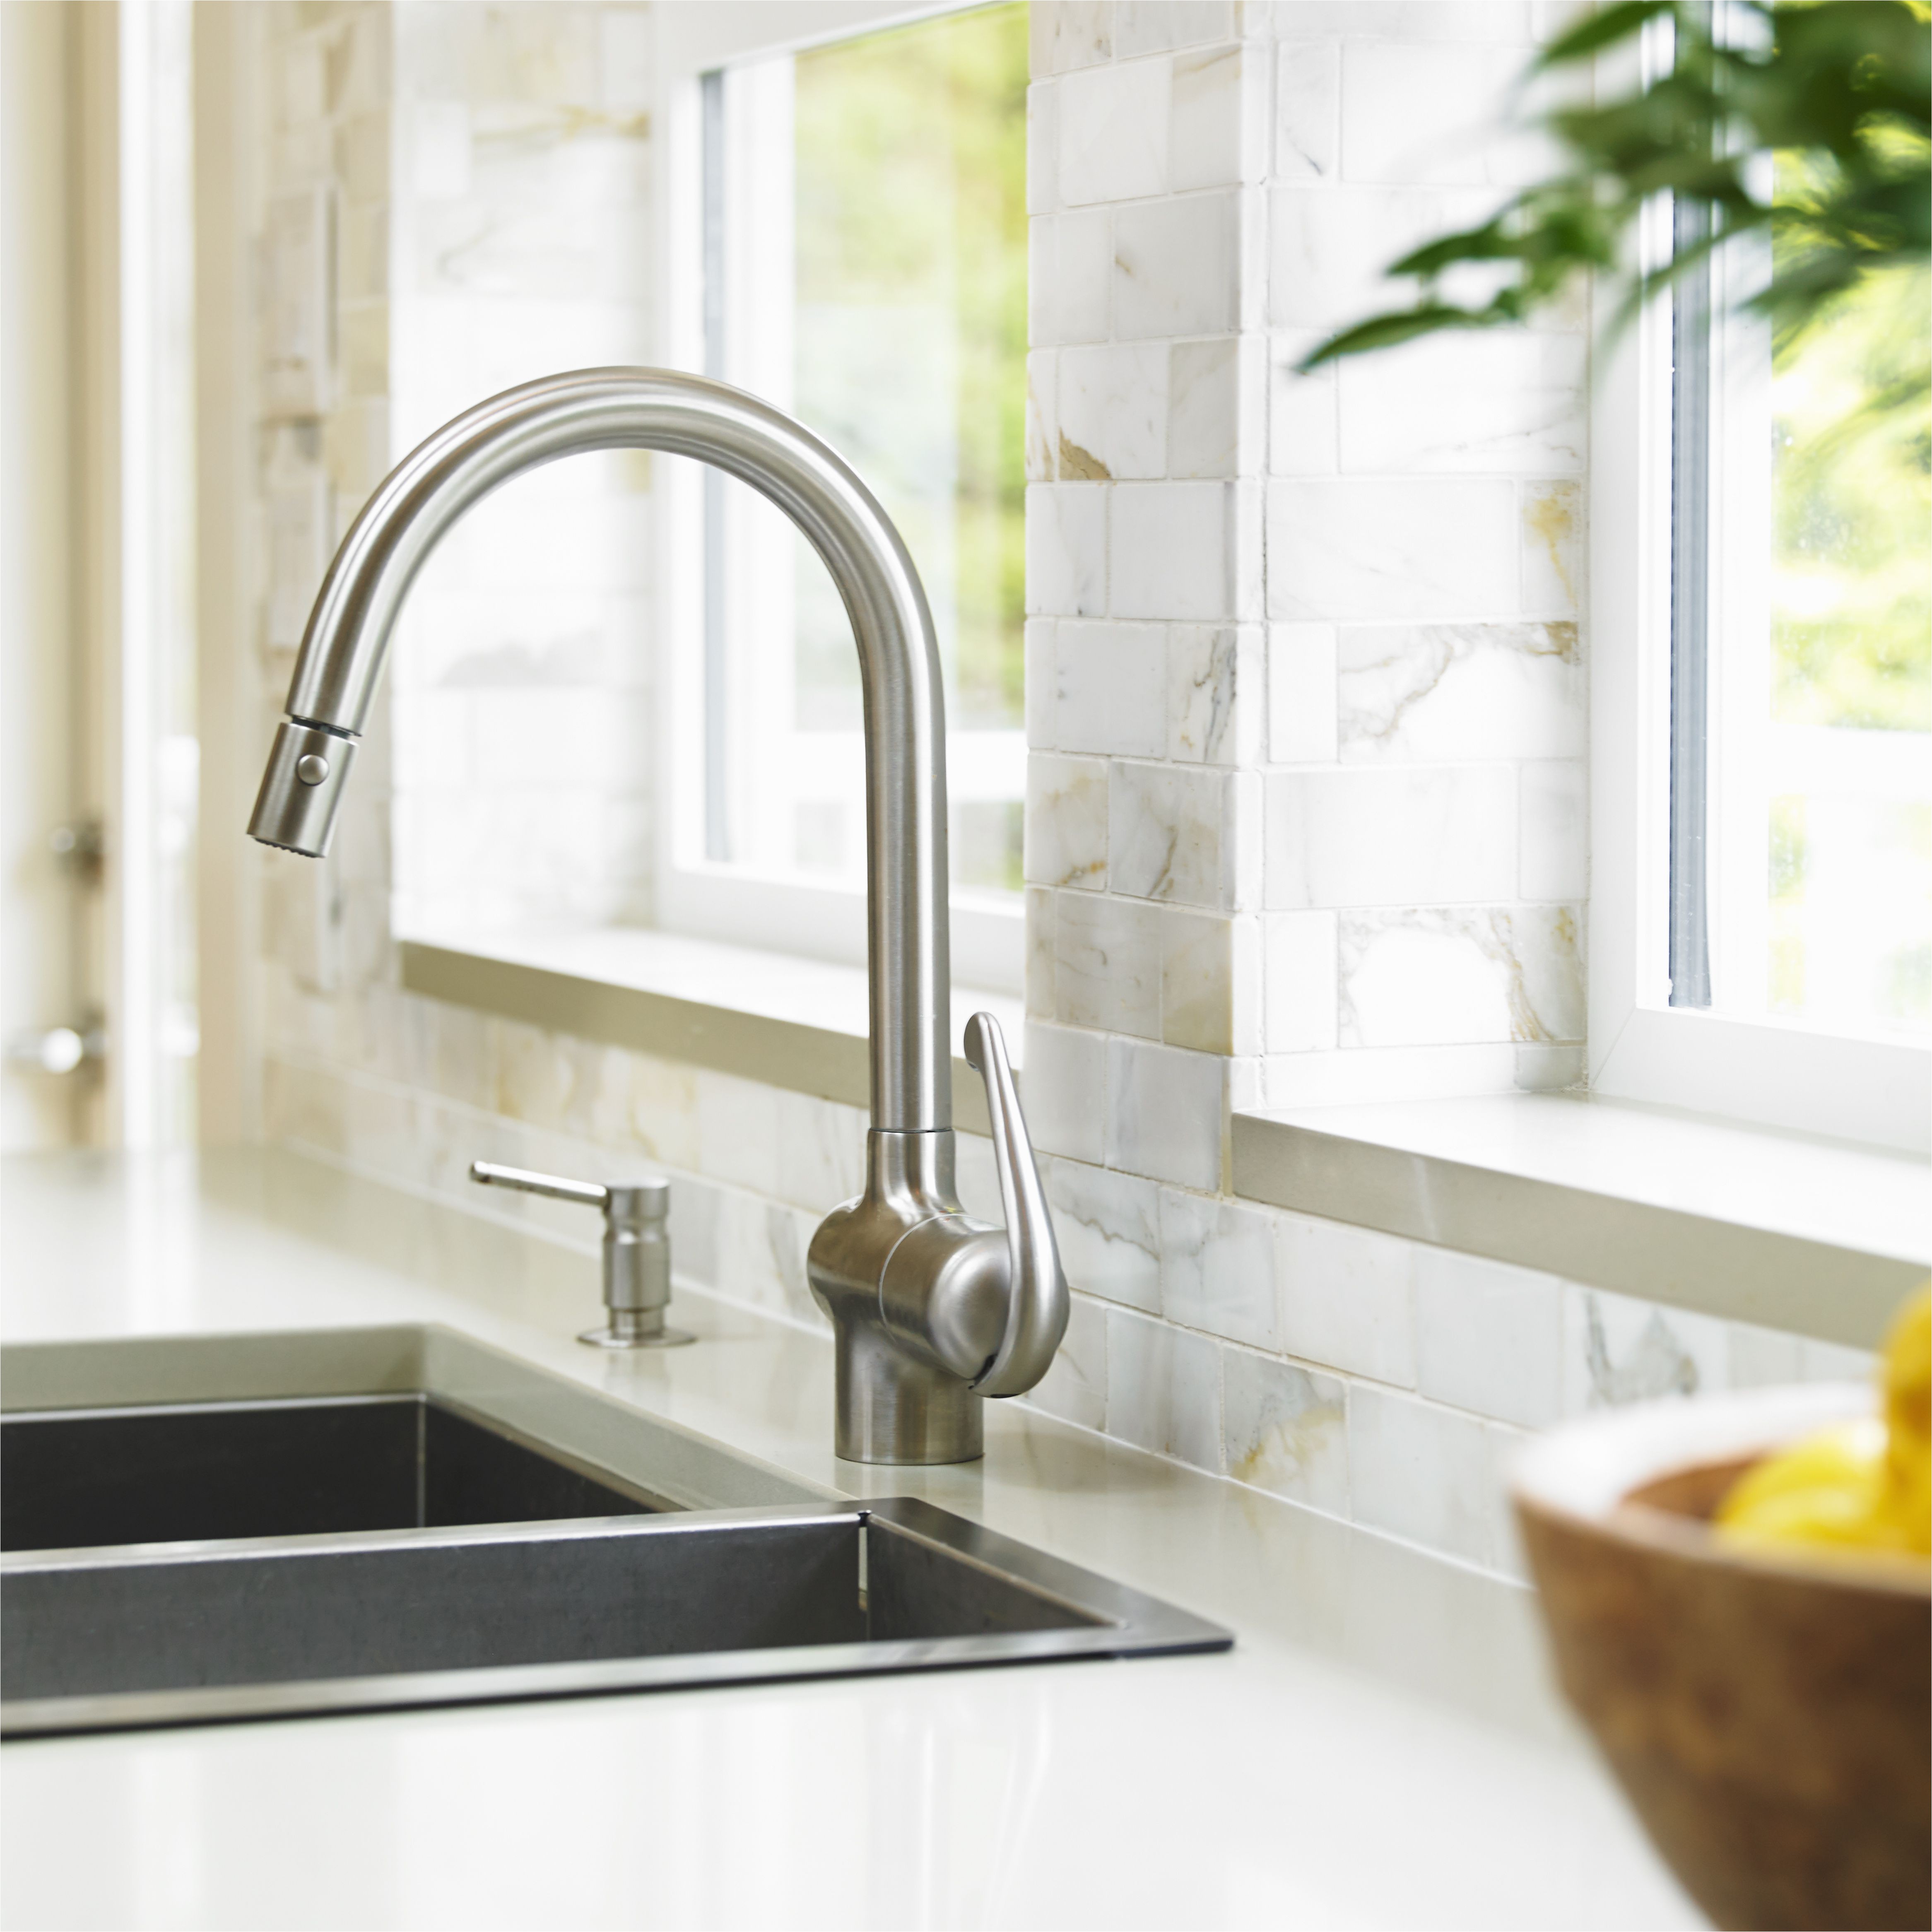 close up of stainless steel kitchen faucet with marble subway backsplash 540781705 57a397b03df78cf45940f722 jpg